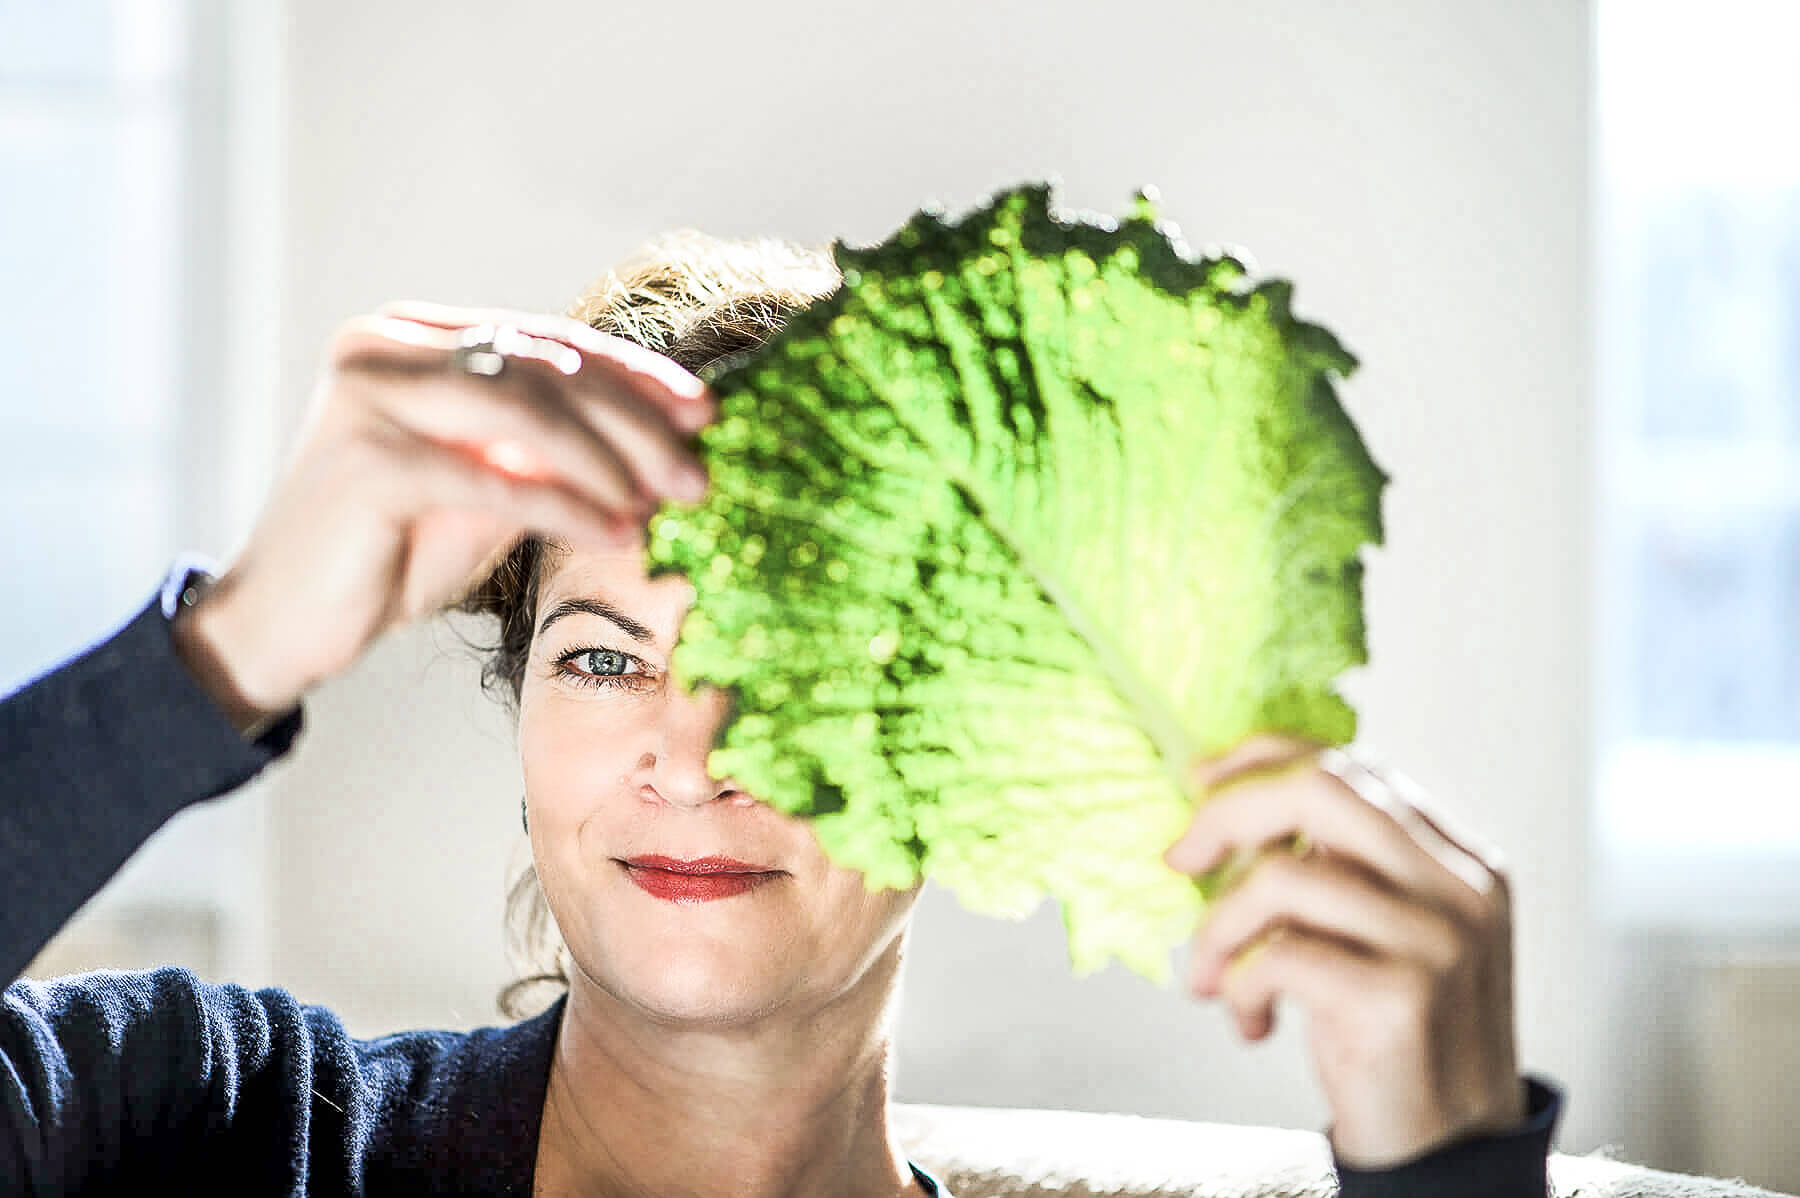 Hanni Rützler holding a salad leaf in front of her face to promote more sustainability in restaurants 